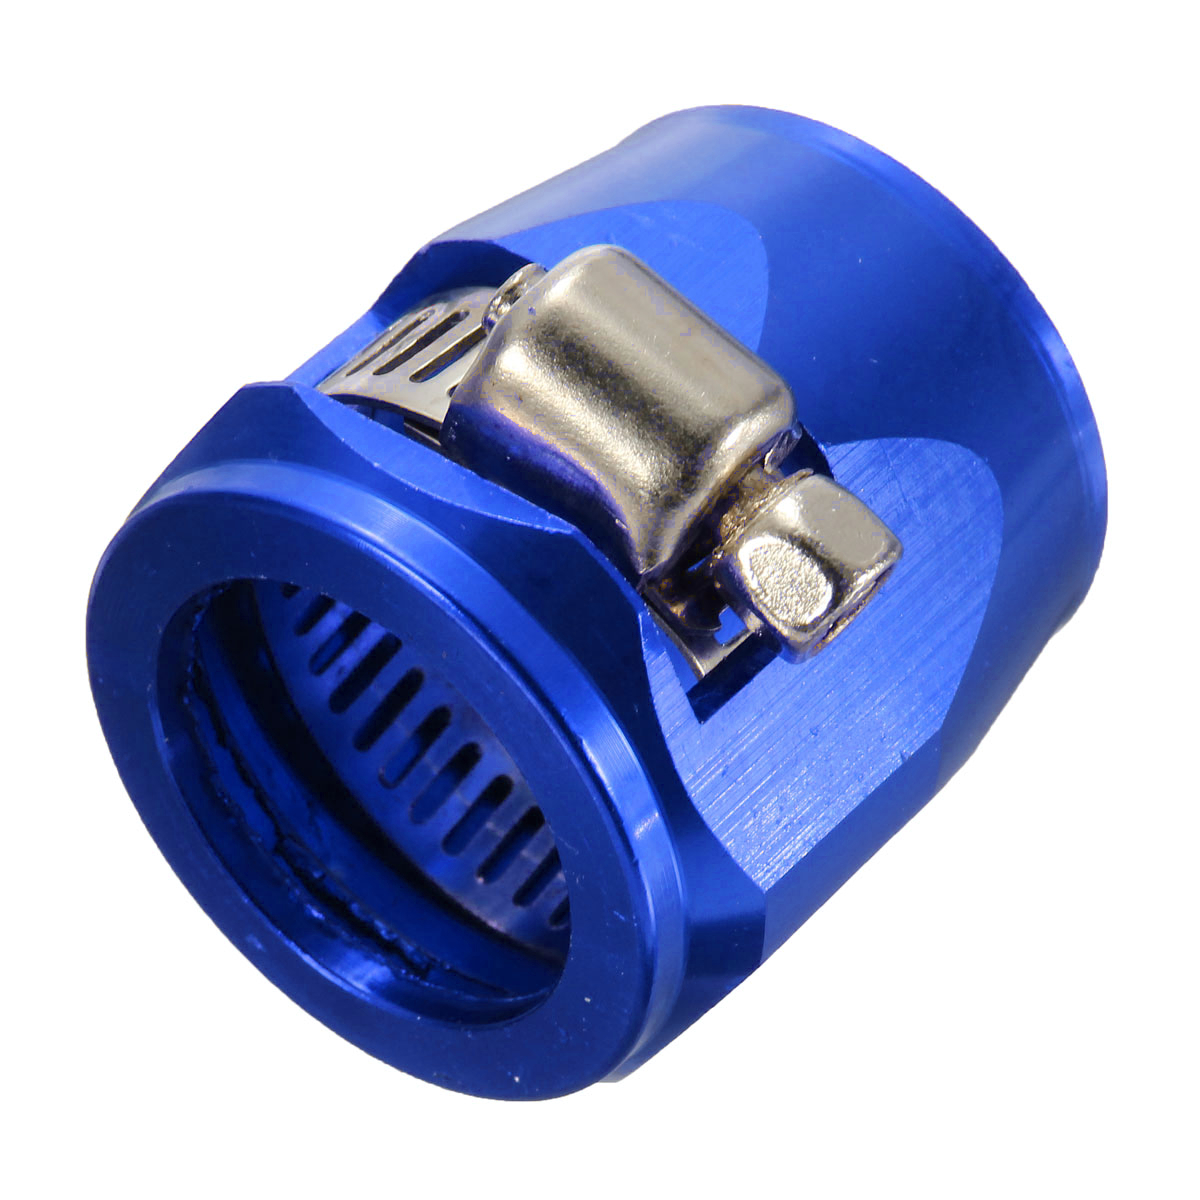 15MM BLUE HOSE END FINISHER FUEL/OIL/WATER JUBILEE CLIP CLAMP AN-06 AN6 